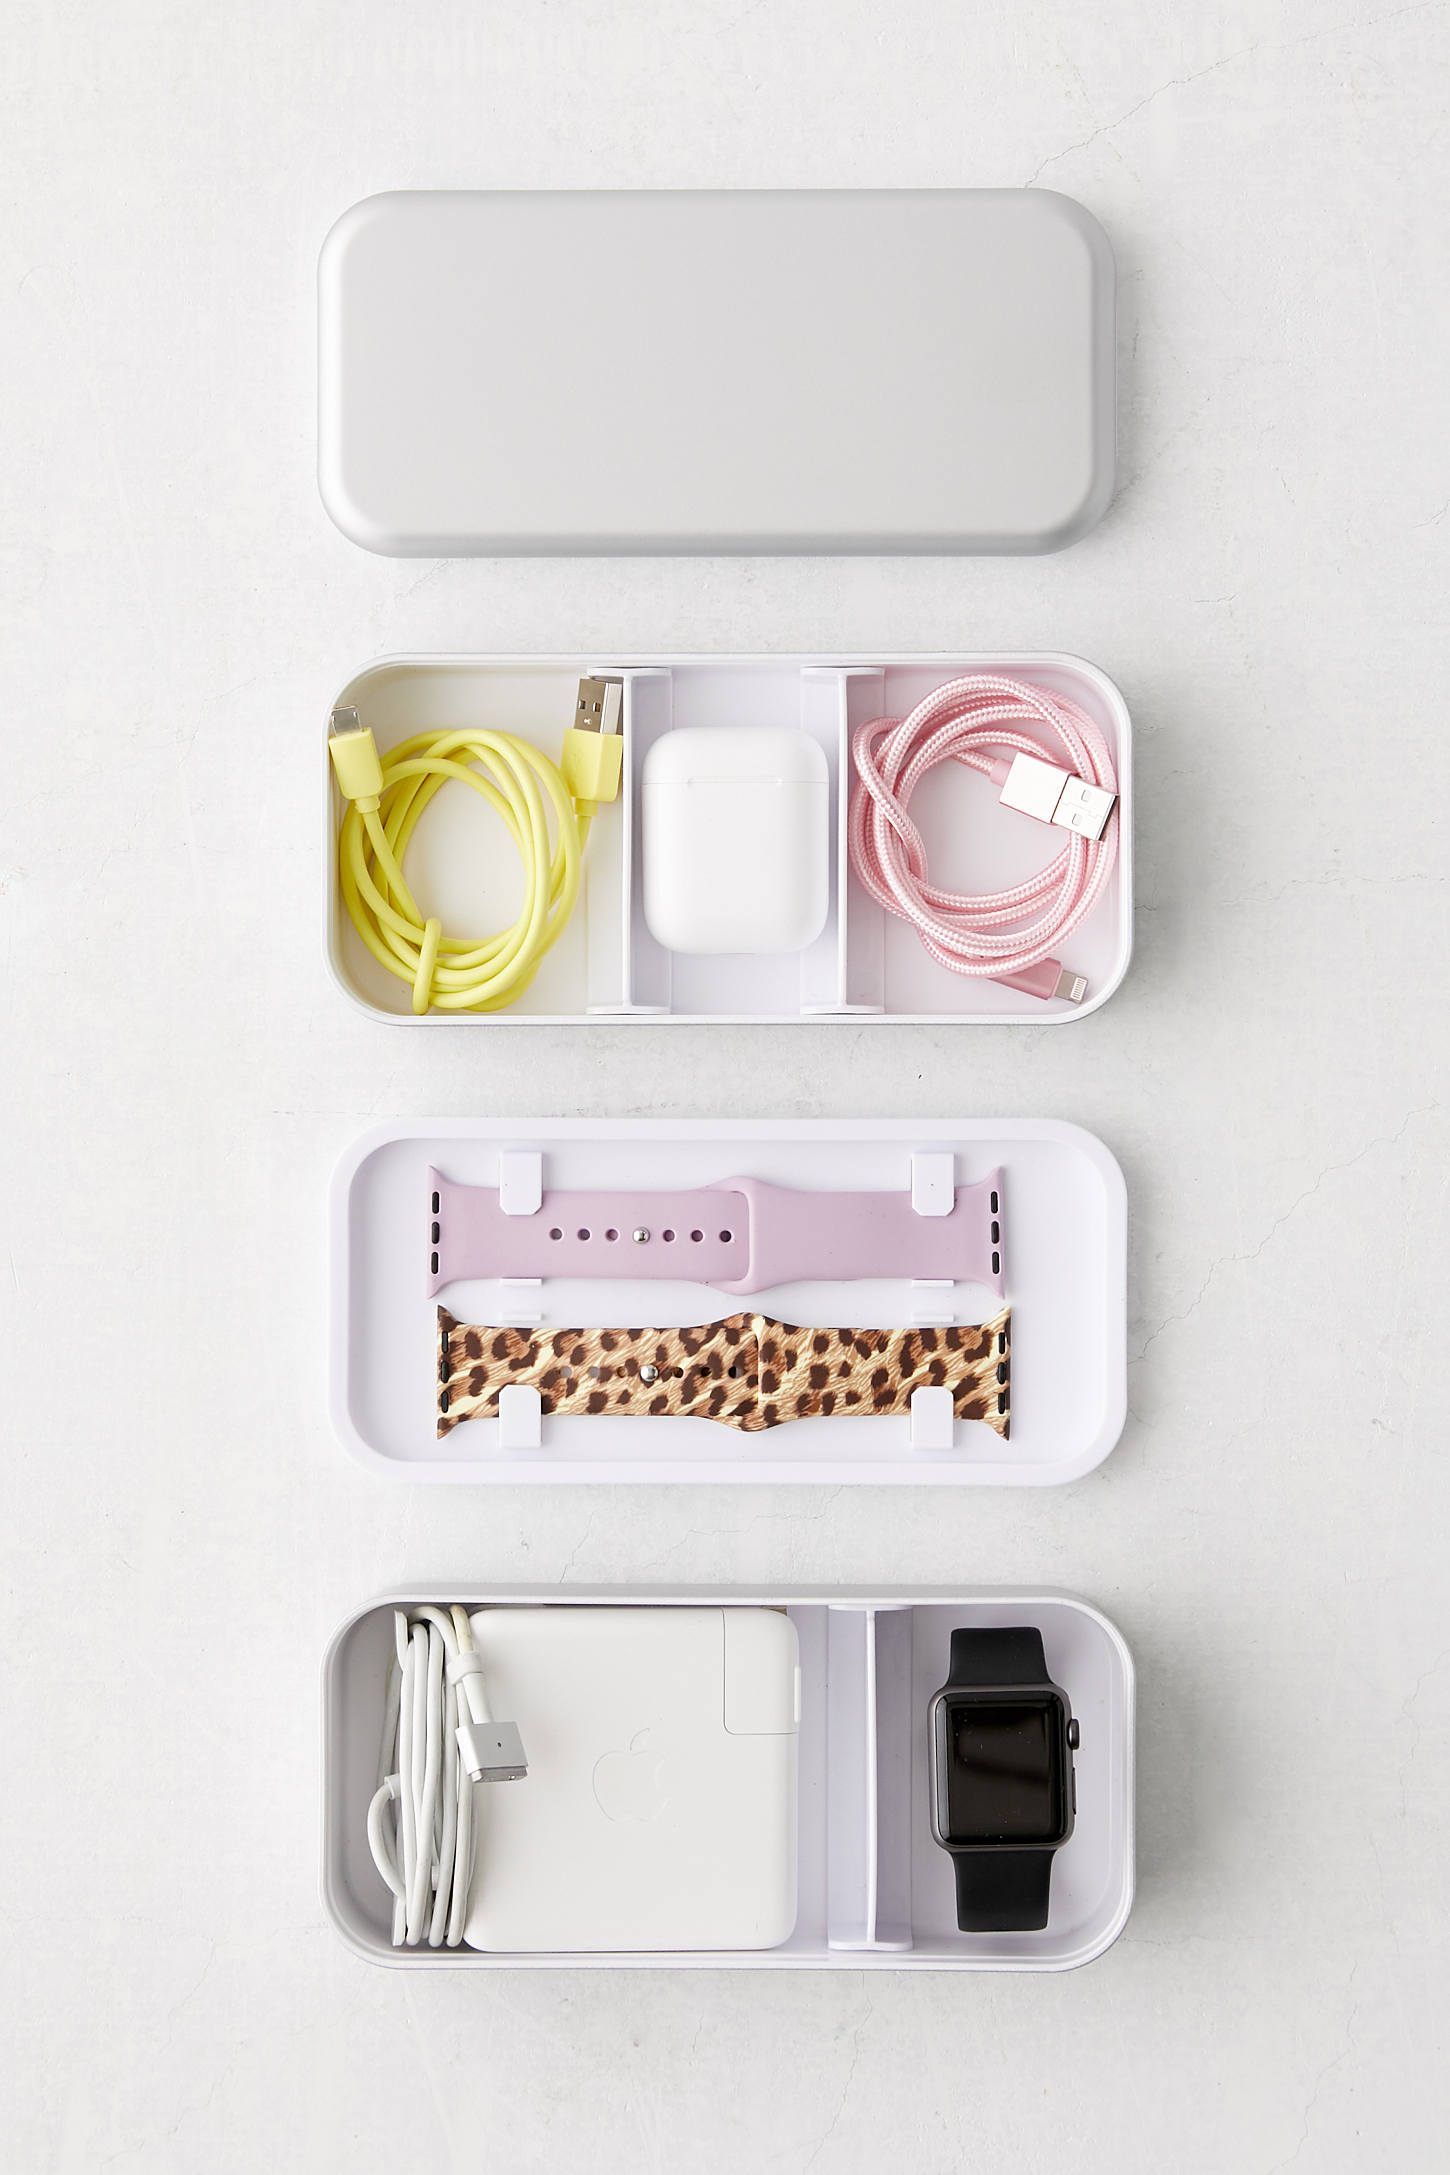 30+ Organizational Gifts for Your Favorite Tidy Friend